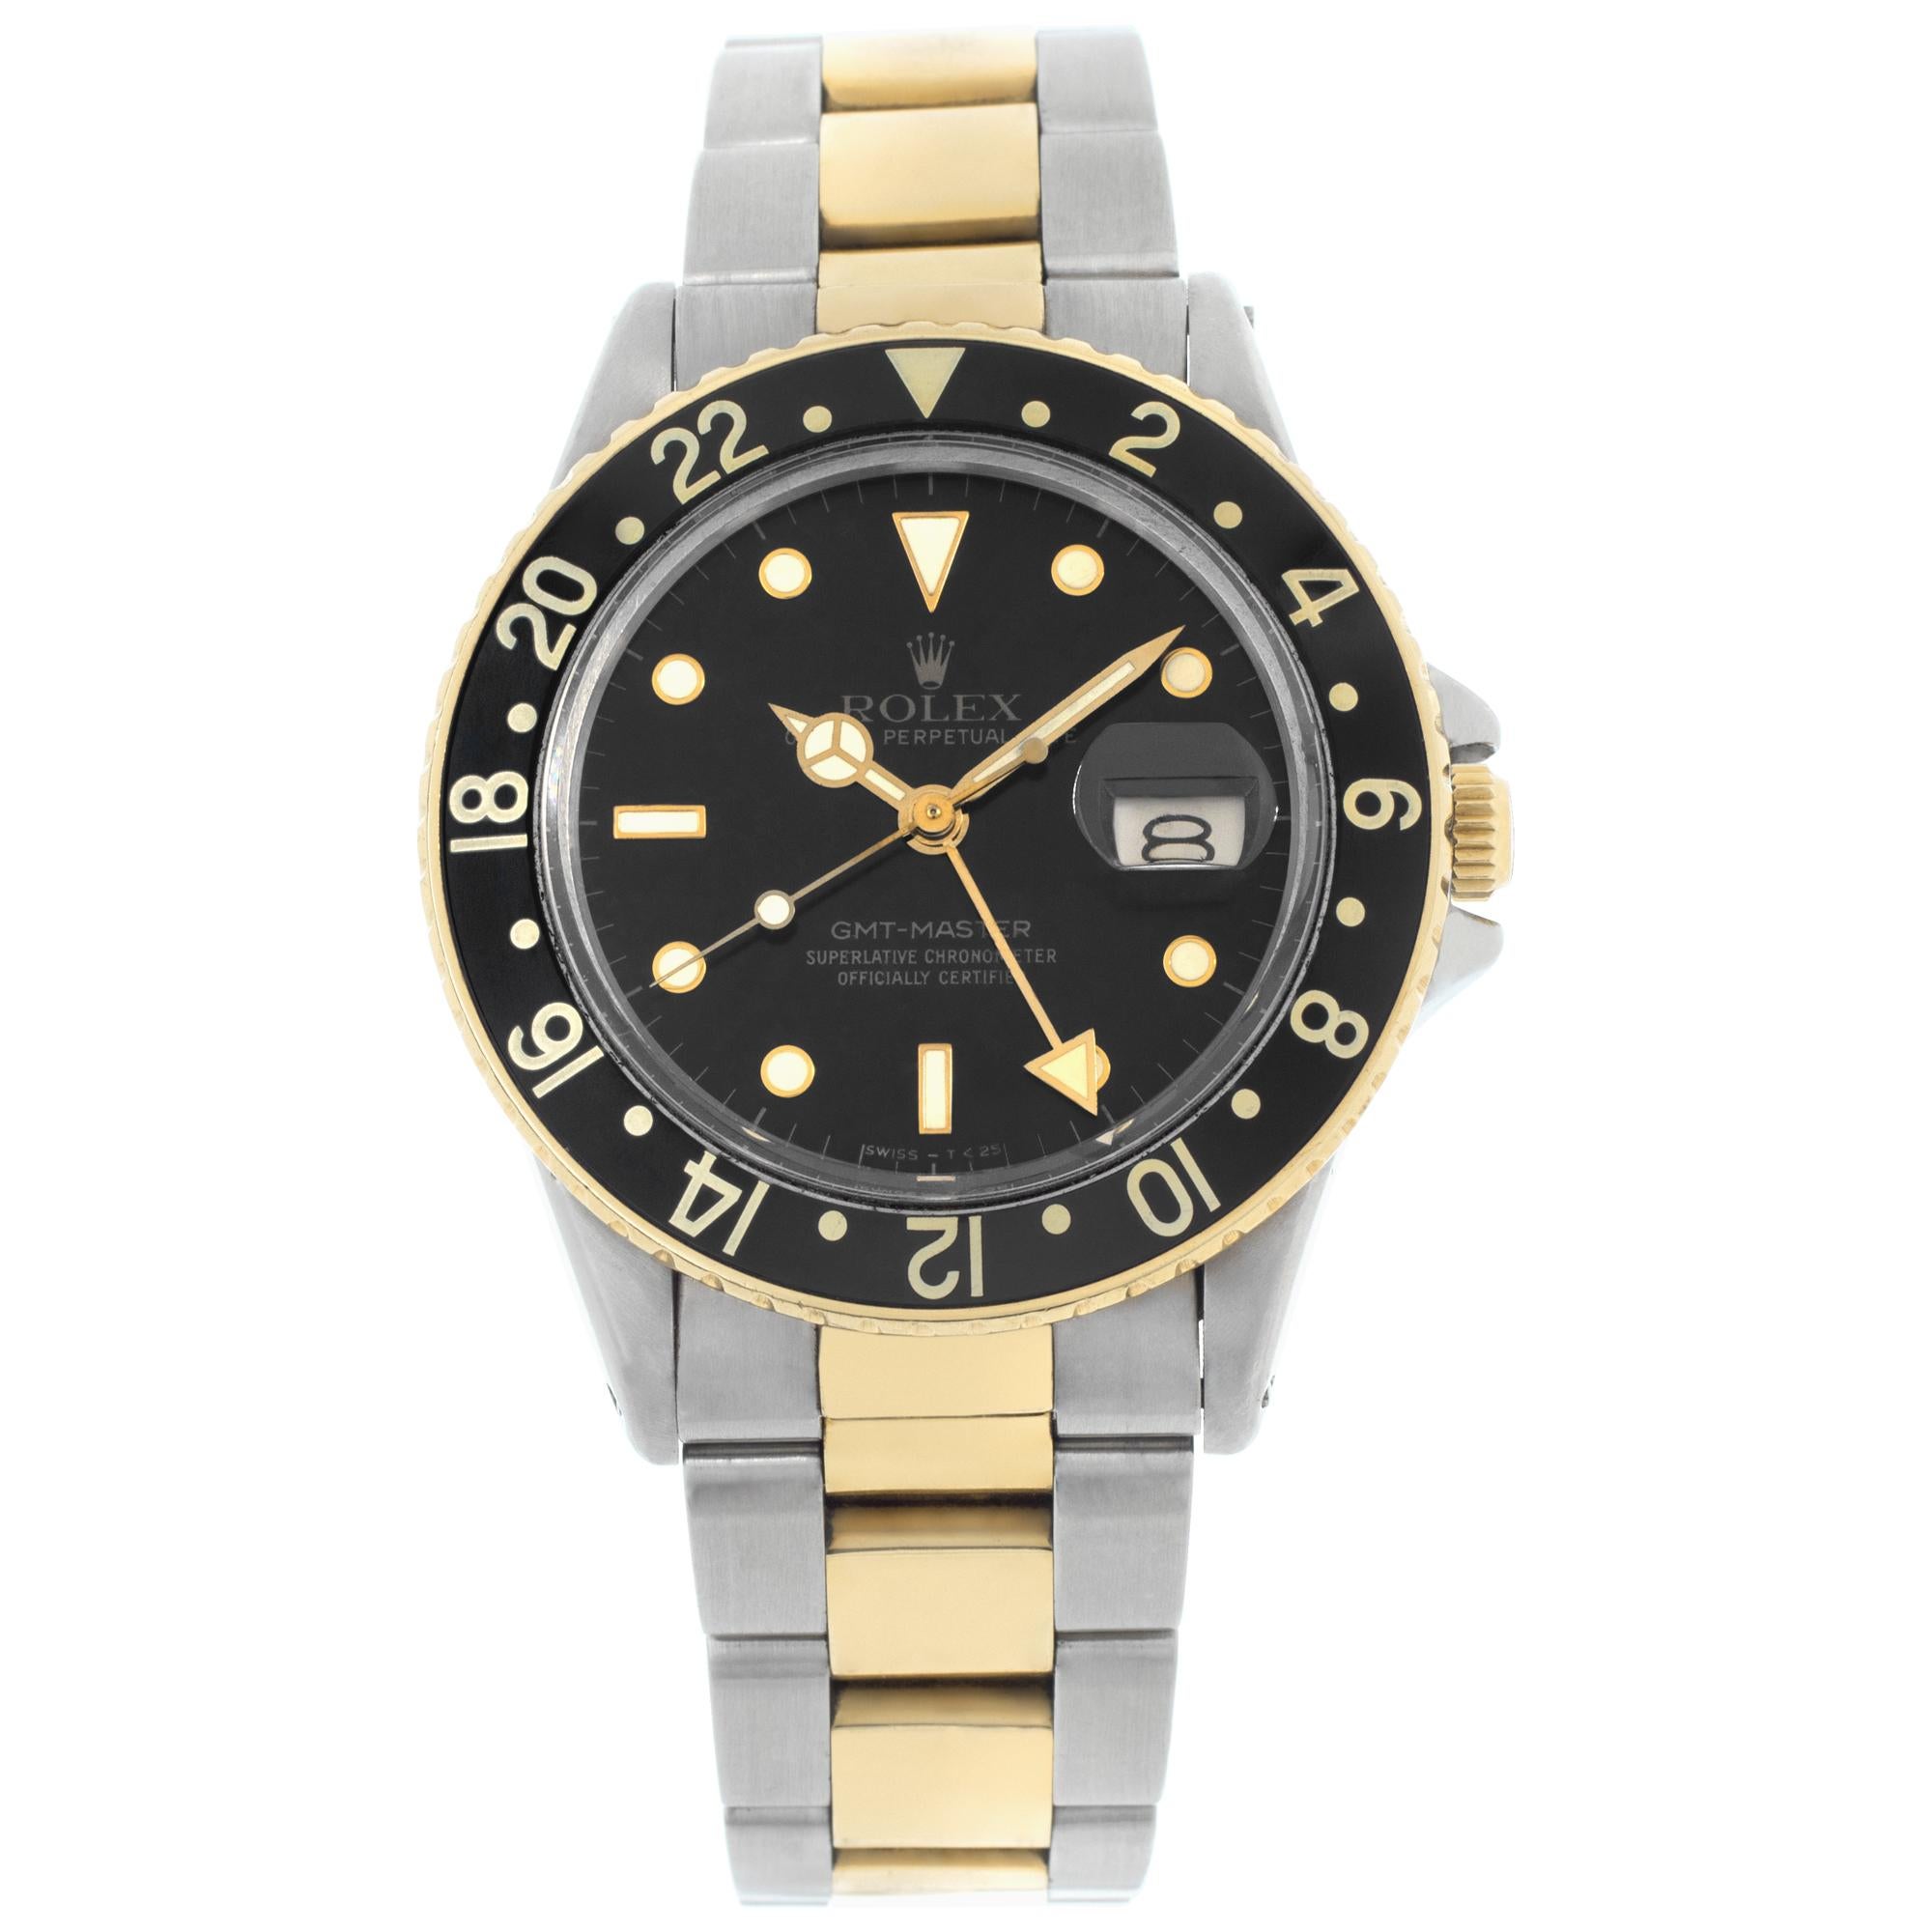 Rolex GMT-Master 16753 in Stainless Steel with a Black dial 40mm Automatic watch For Sale